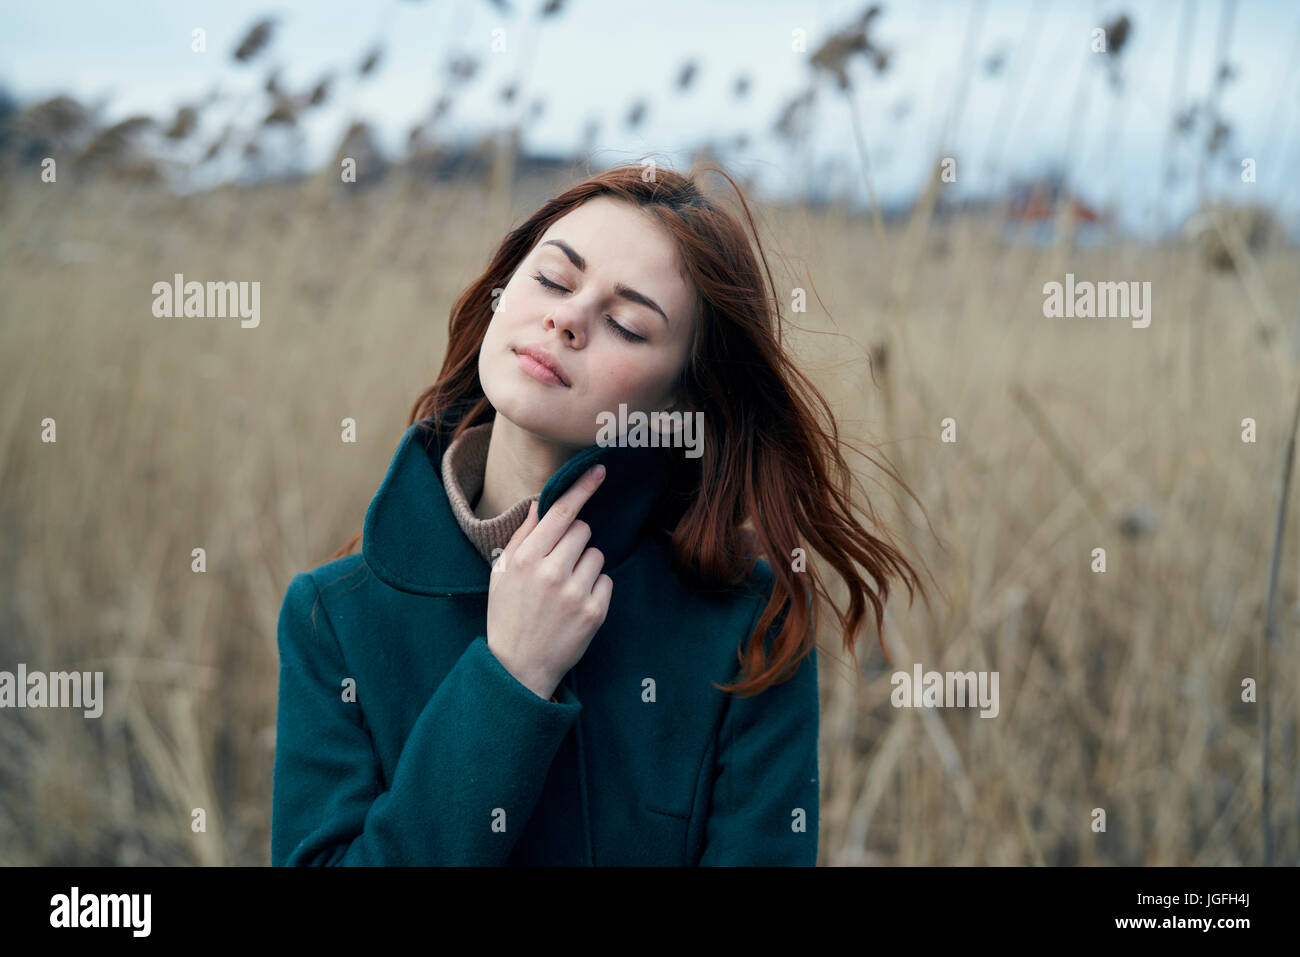 Pensive Caucasian woman standing in field holding collar Stock Photo